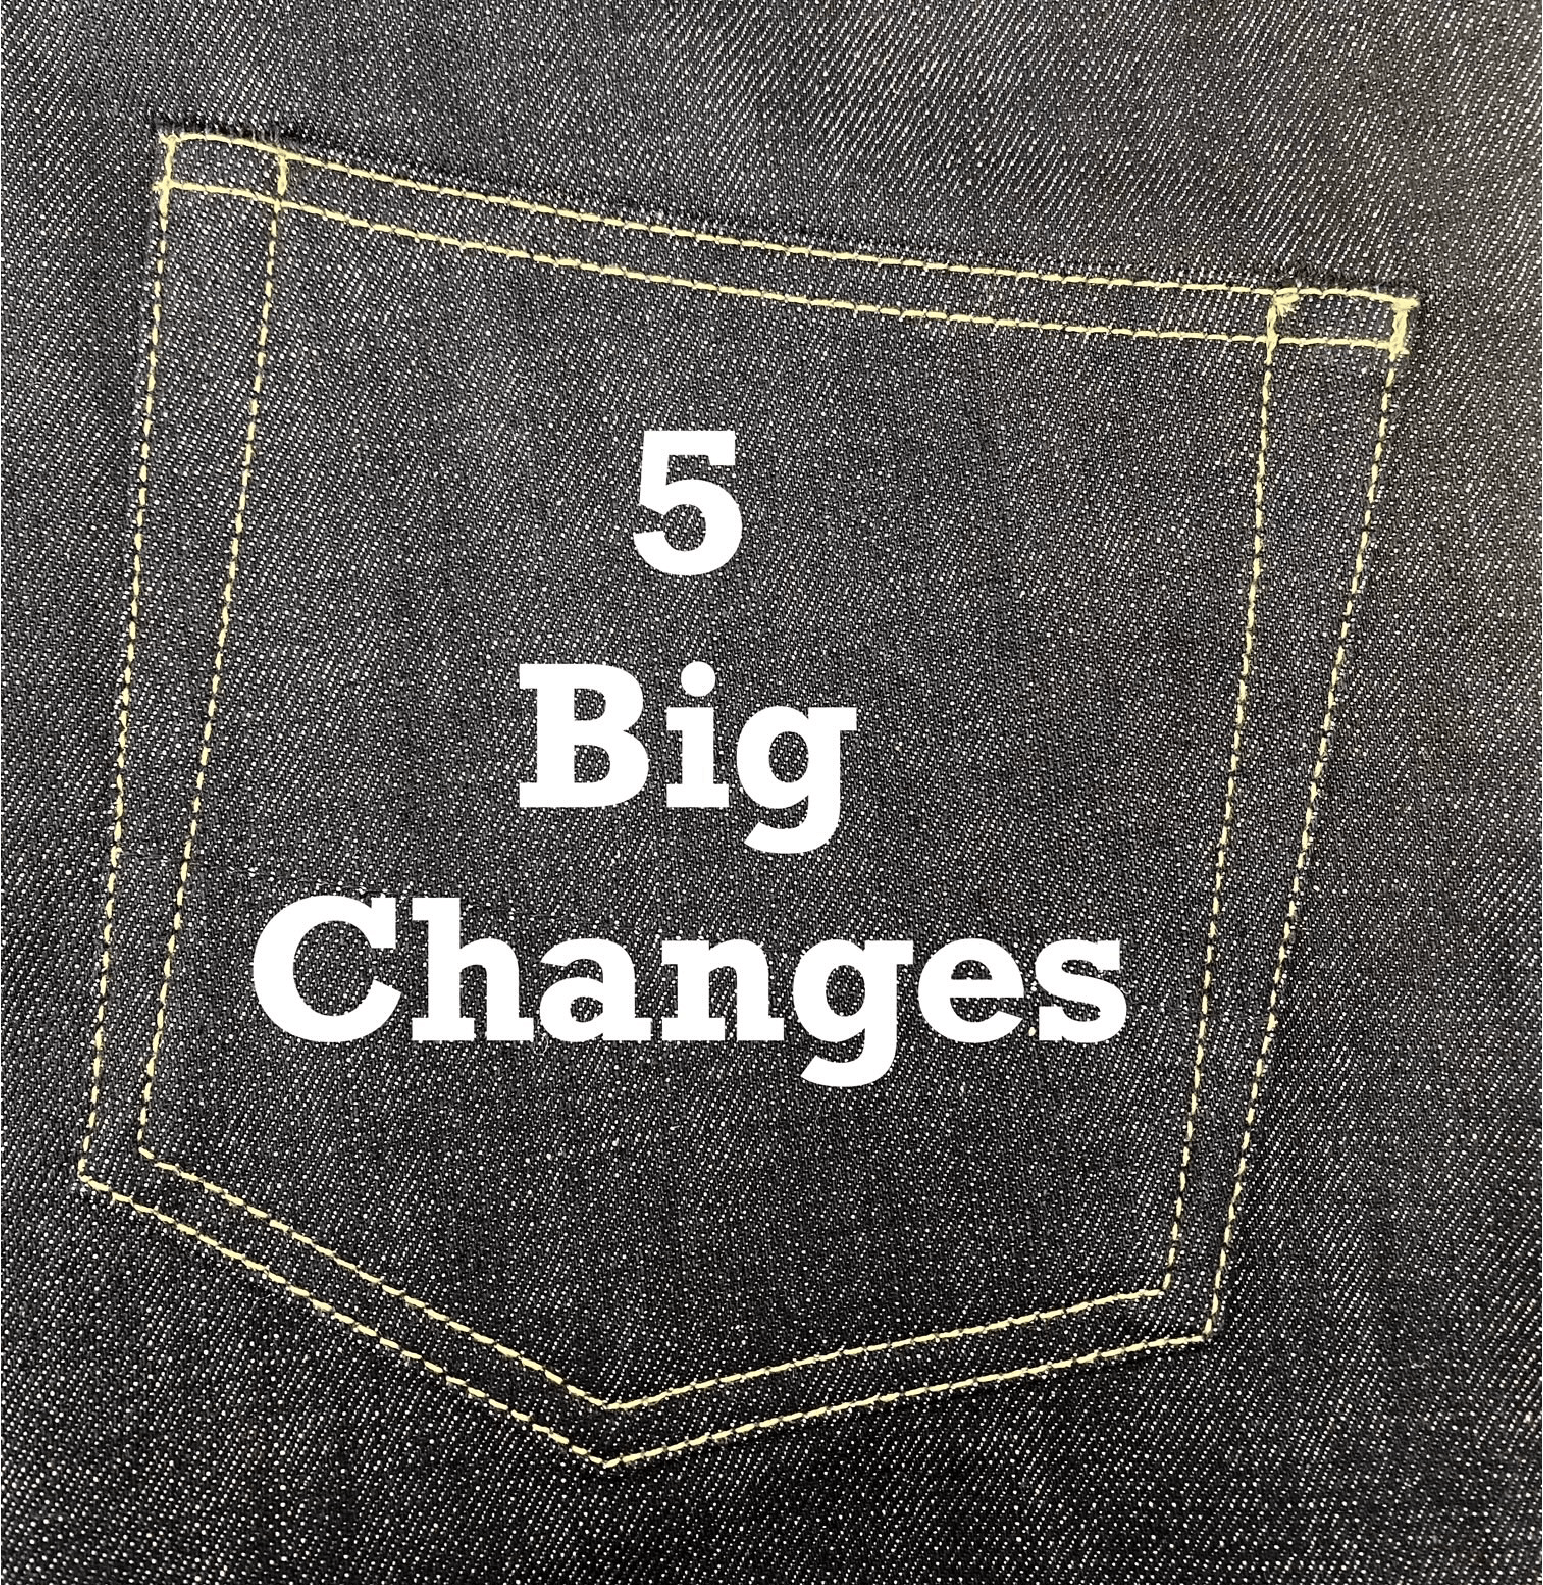 Five big changes from the last 10 years within the denim industry